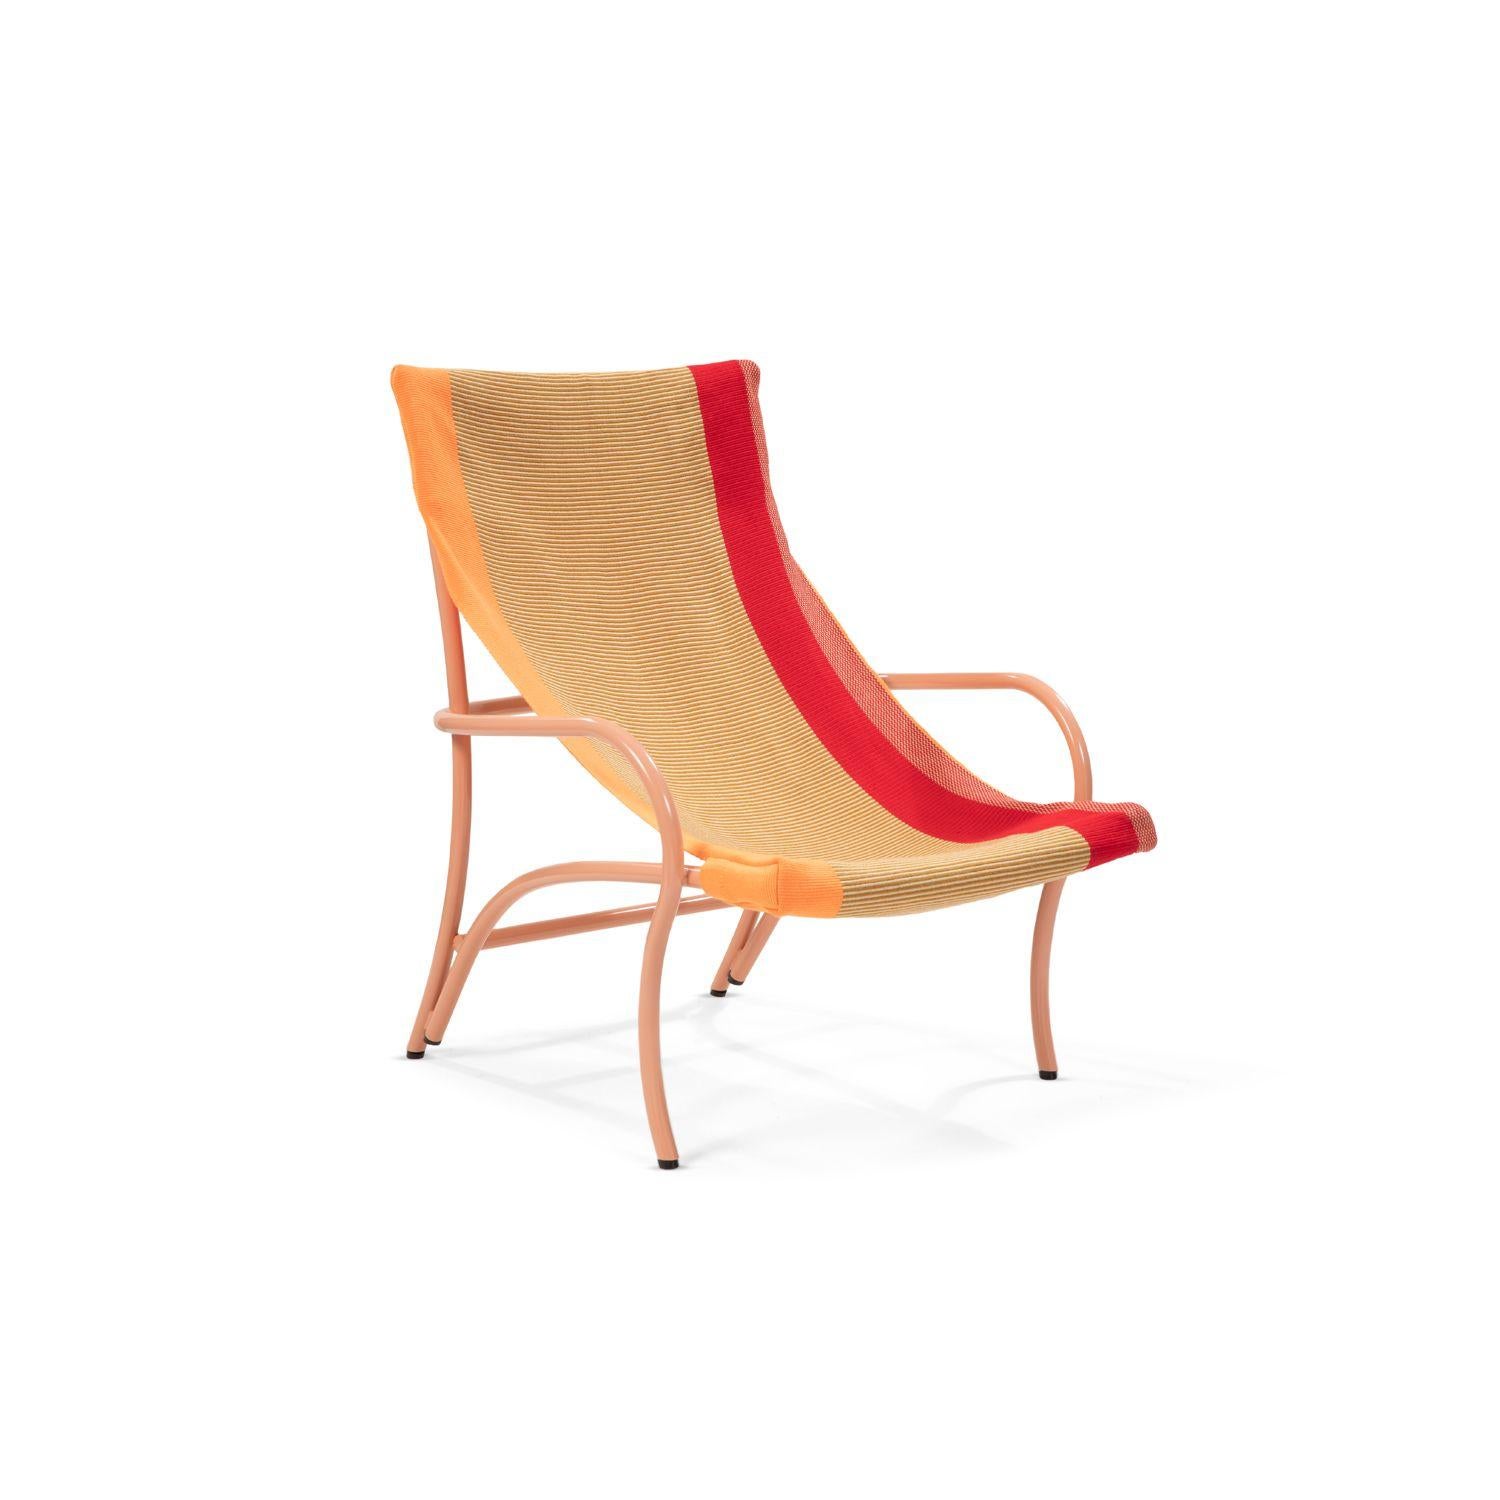 dimensions: wxhxd 727x885x867 mm
With the Maraca Lounge Chair, Sebastian Herkner has created a charming spot to relax, inspired by the traditional Colombian hammocks. The gentle curves of the steel frame mirror the bend of the seating fabric, whose